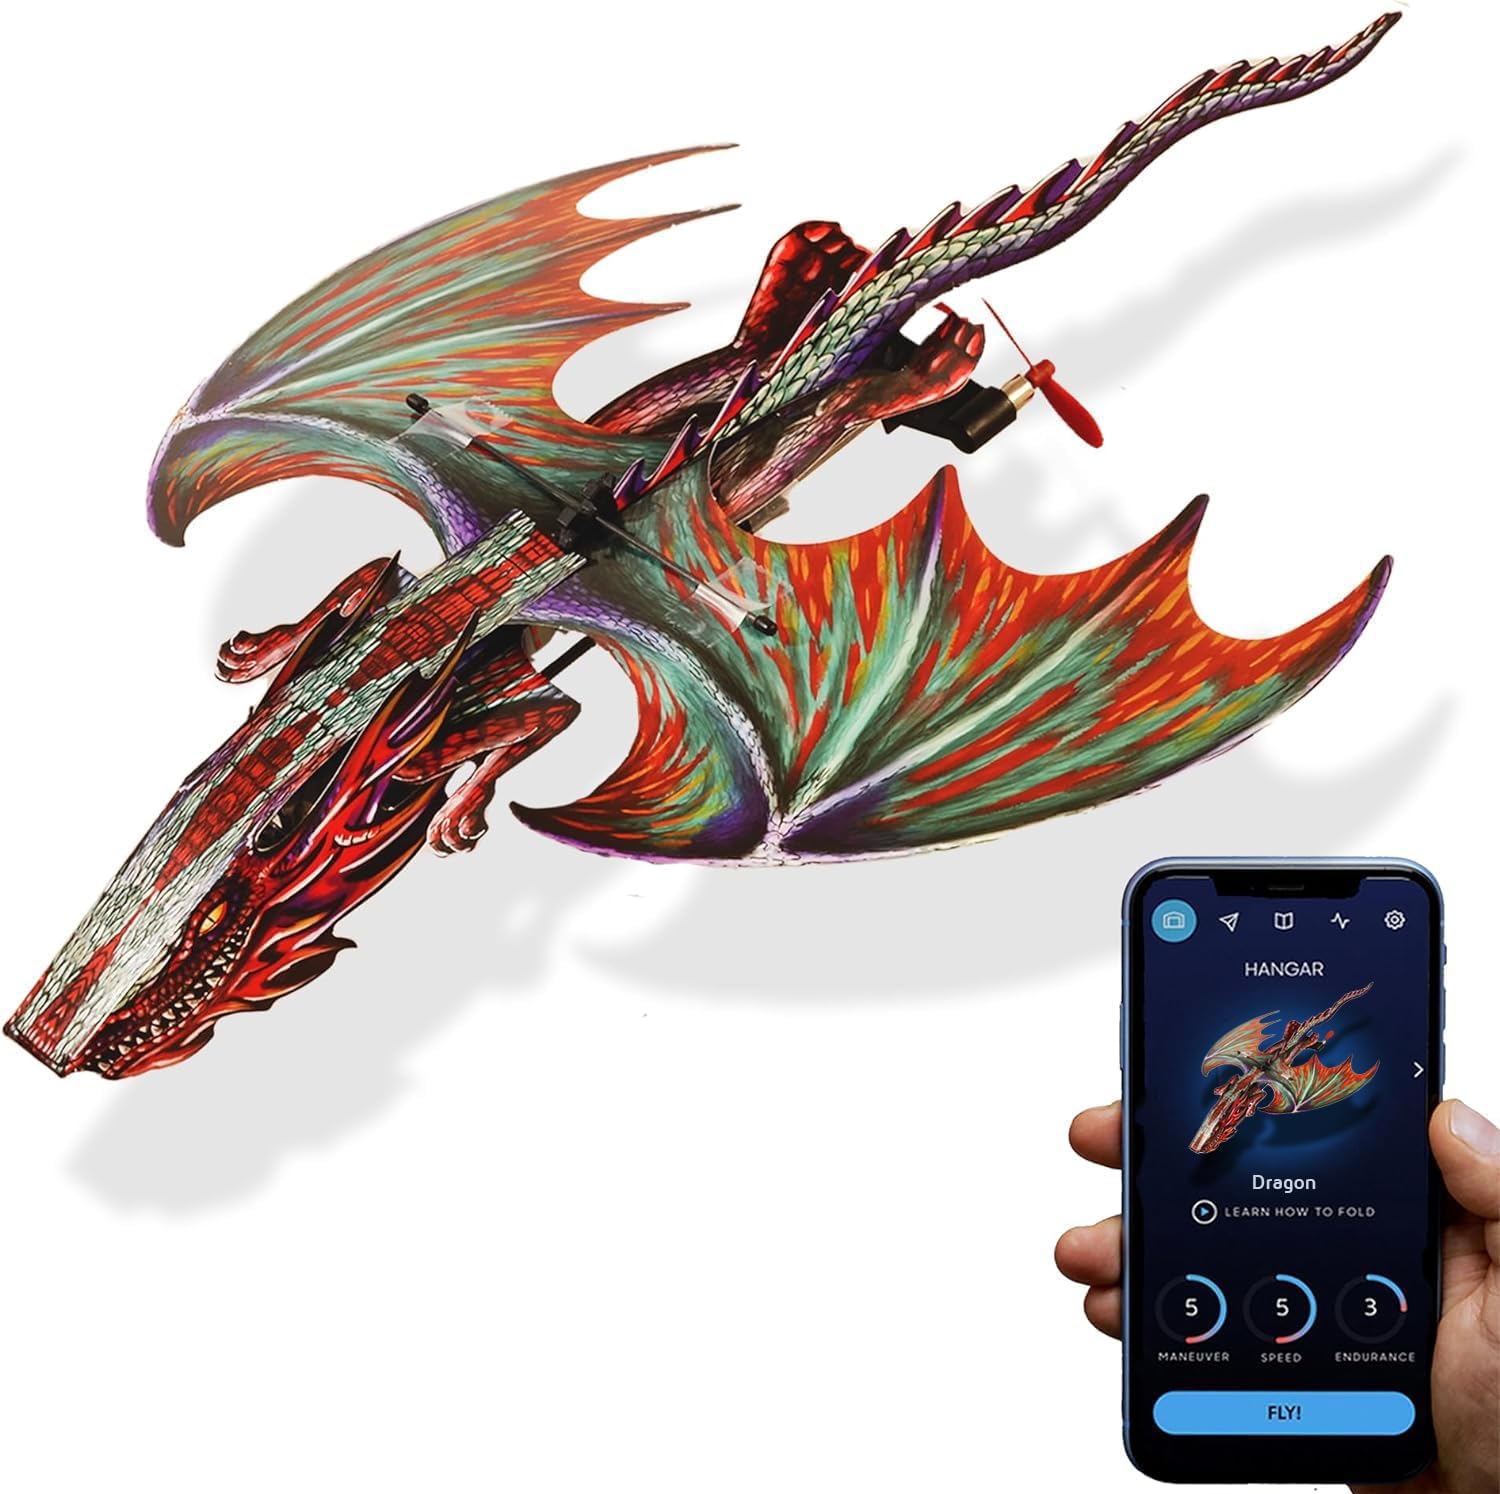 DRAGON WITH POWERUP 4.0 AIRPLANE